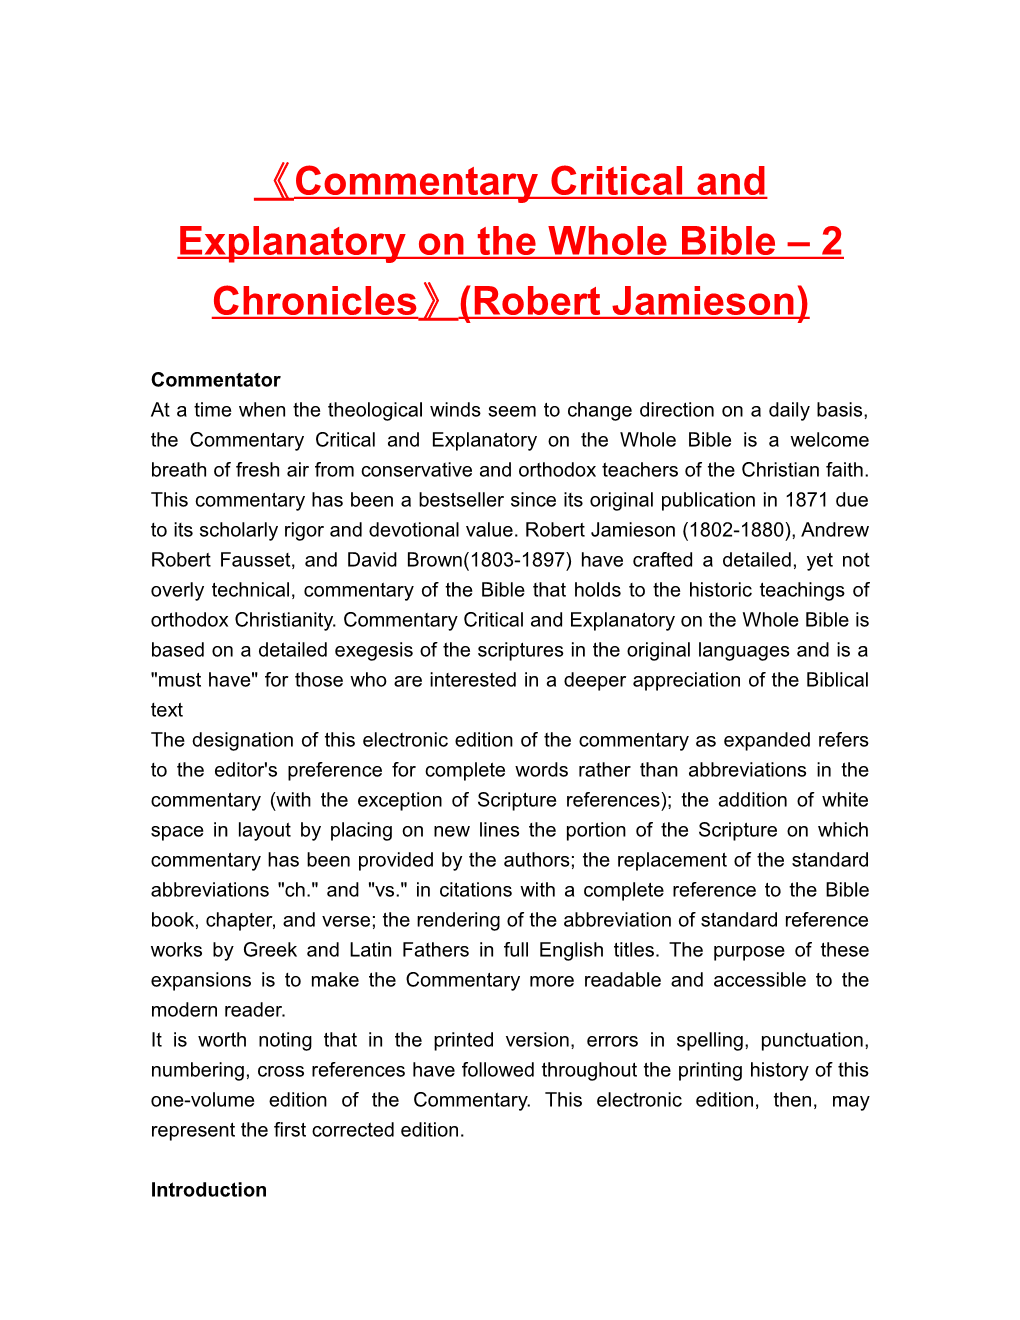 Commentary Critical and Explanatory on the Whole Bible 2 Chronicles (Robert Jamieson)